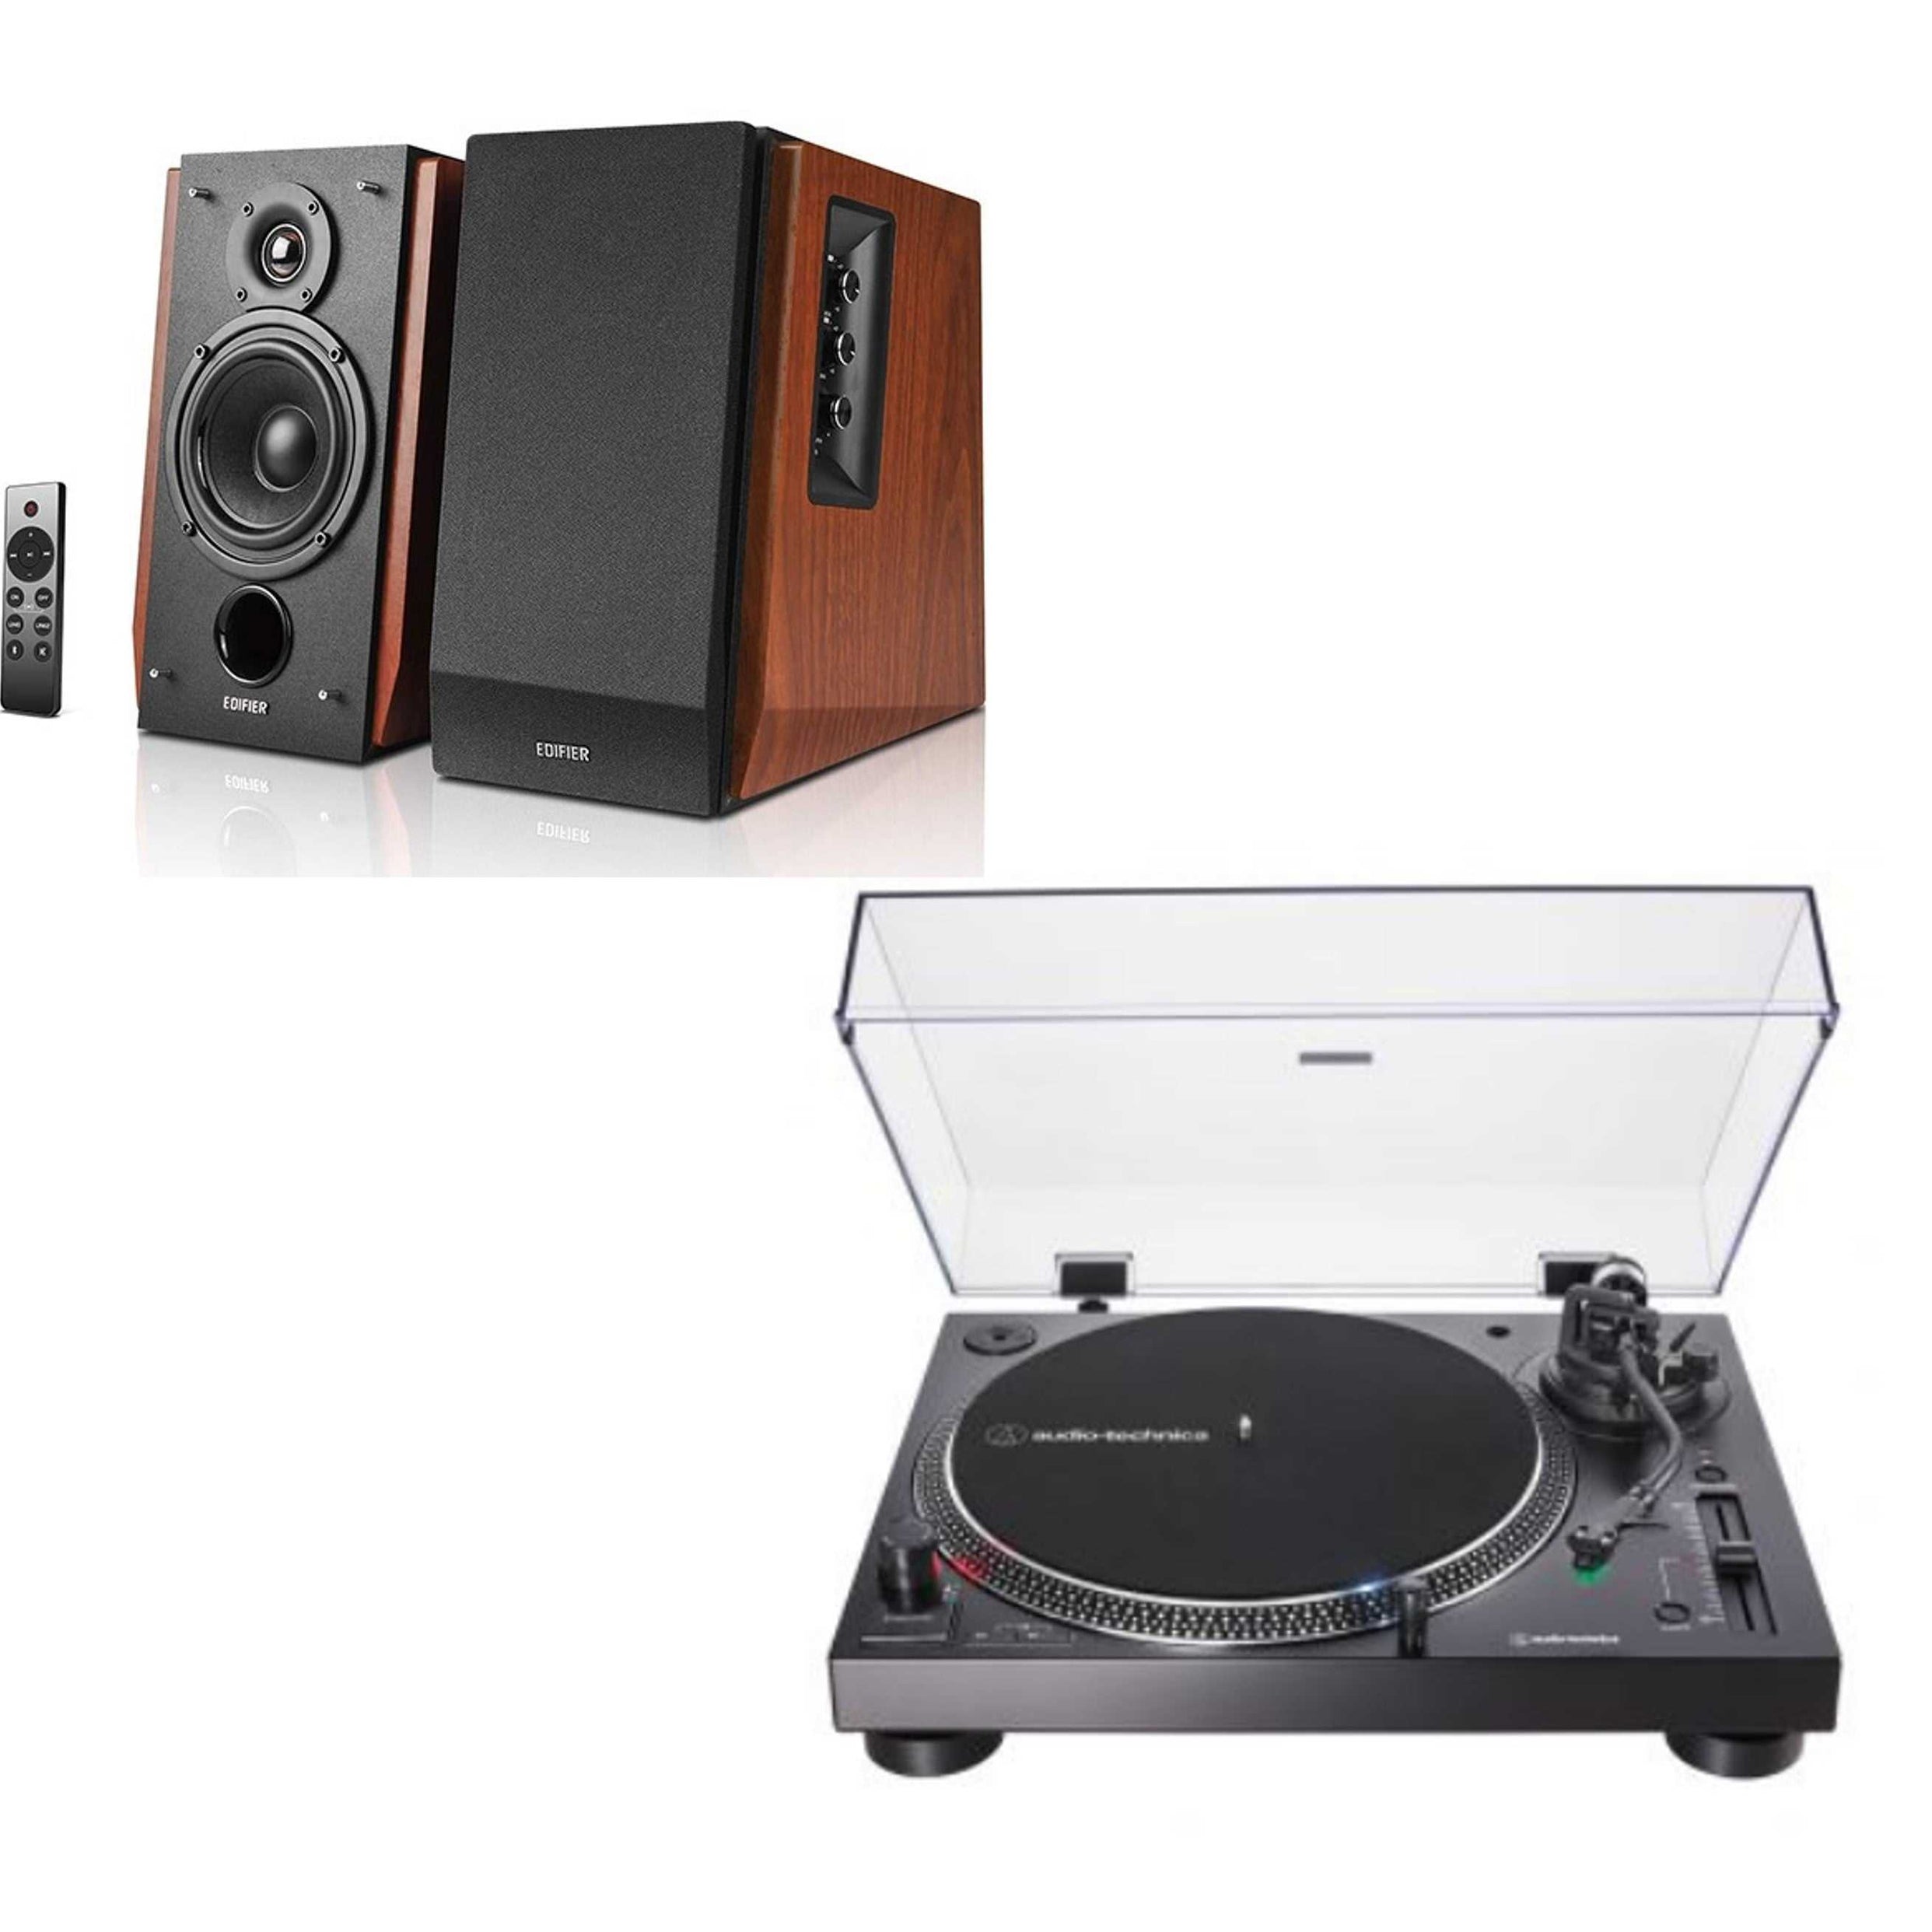 Audio-Technica AT-LP120XUSB Turntable with Pitch Control and Edifier R1700BTs Wood Active Bluetooth Speaker Bundle